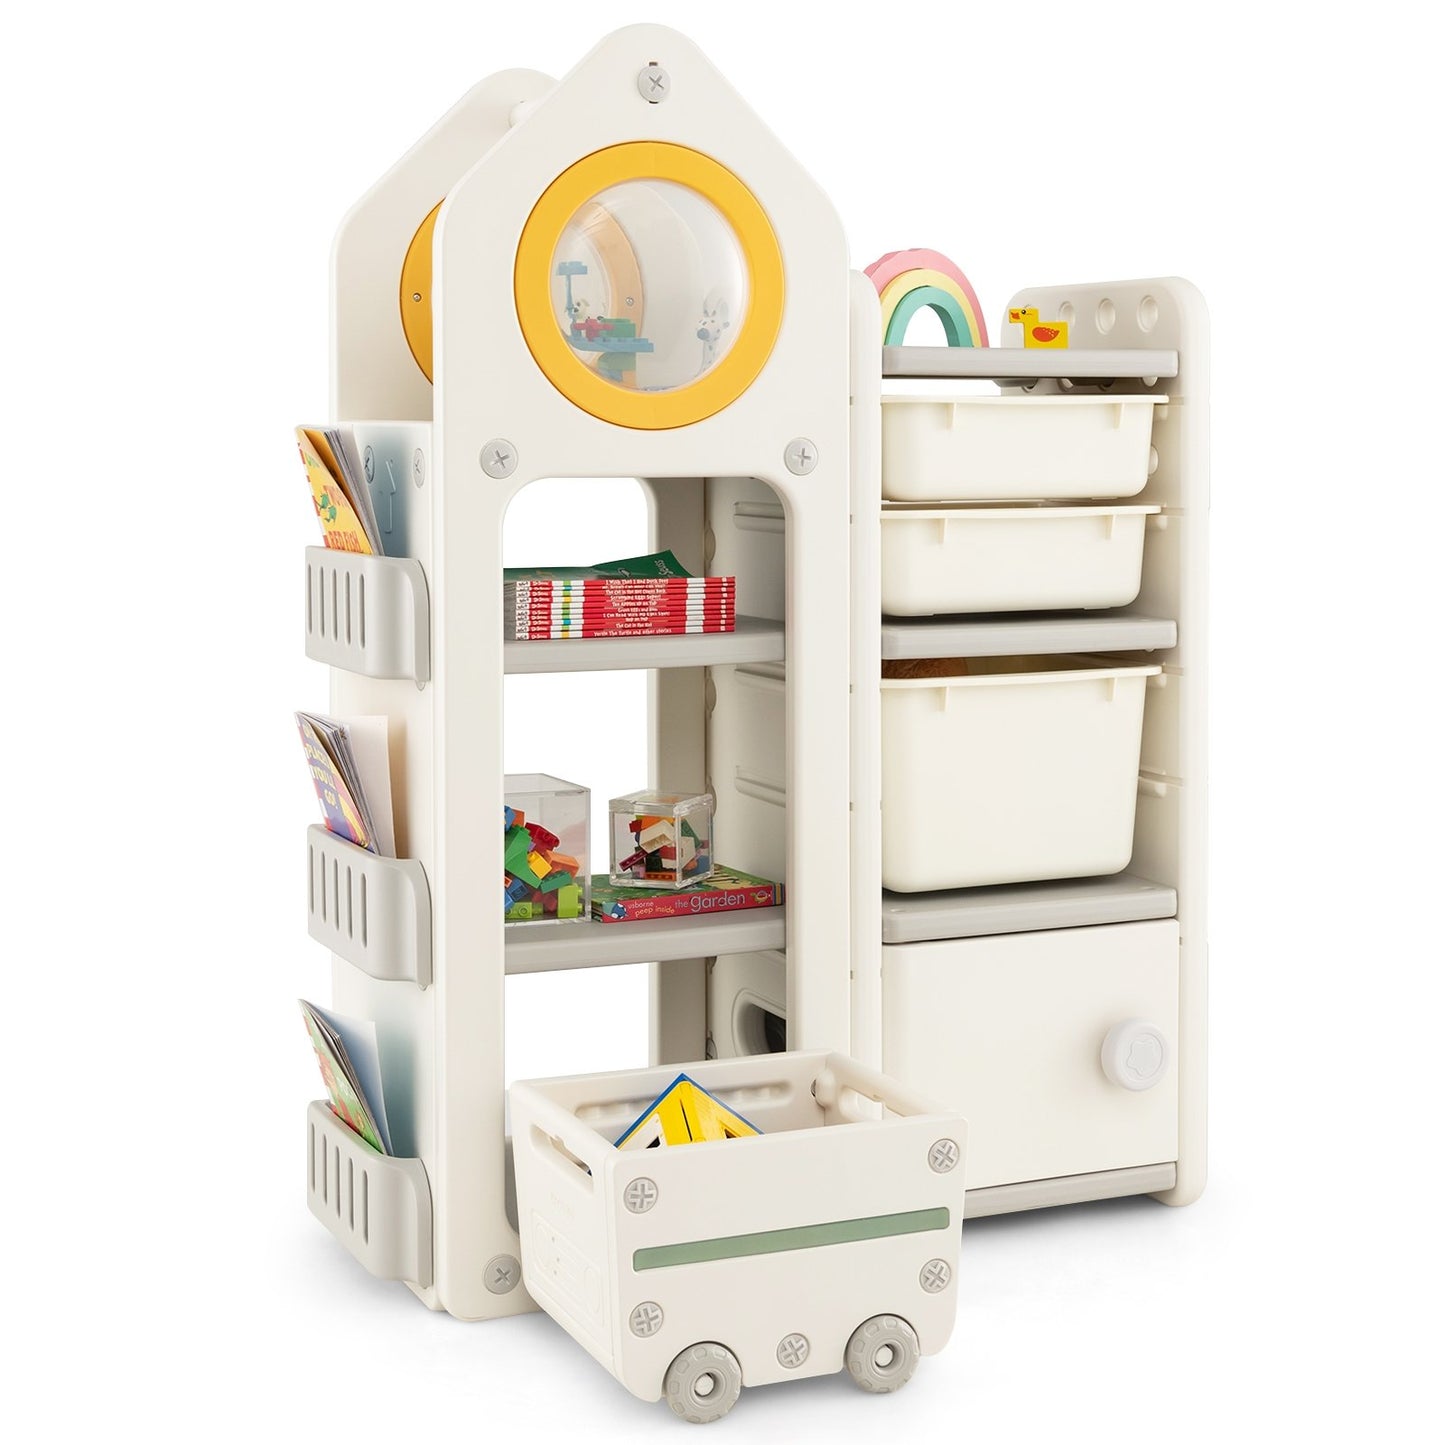 Multipurpose Toy Chest and Bookshelf with Mobile Trolley for Bedroom, Gray